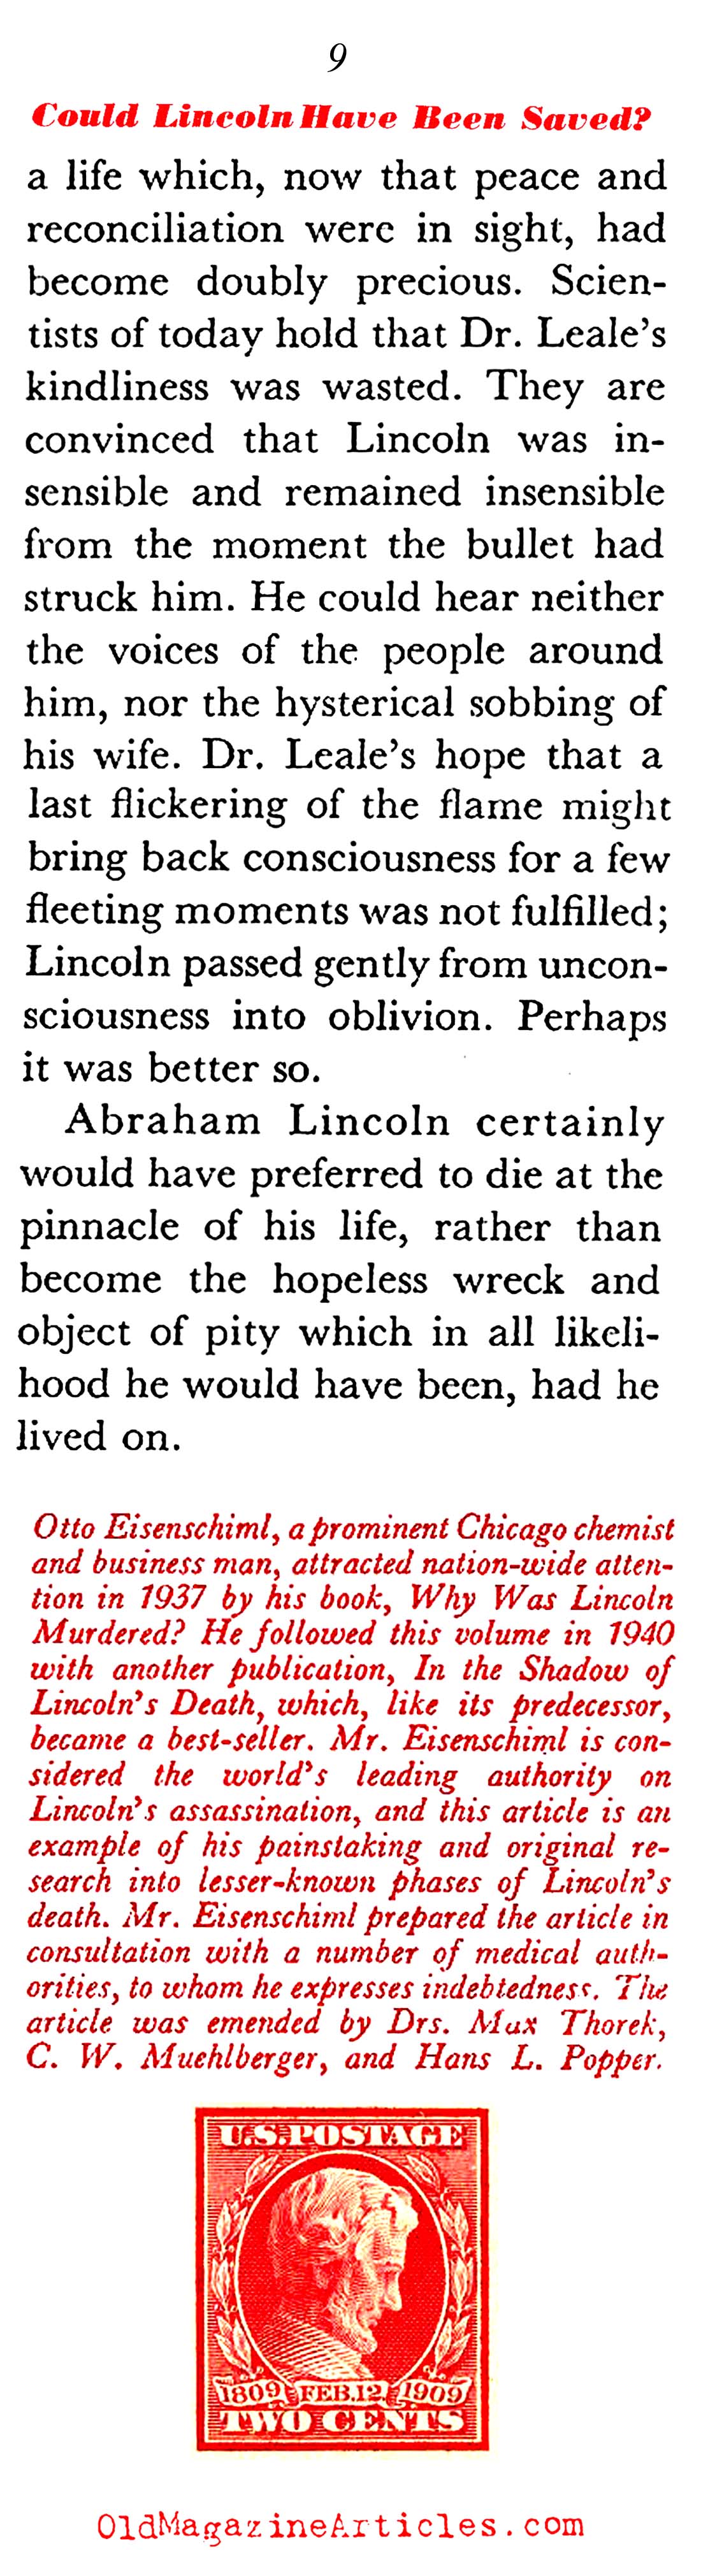 The Dying Lincoln: Could He Have Survived? (Coronet Magazine, 1941)